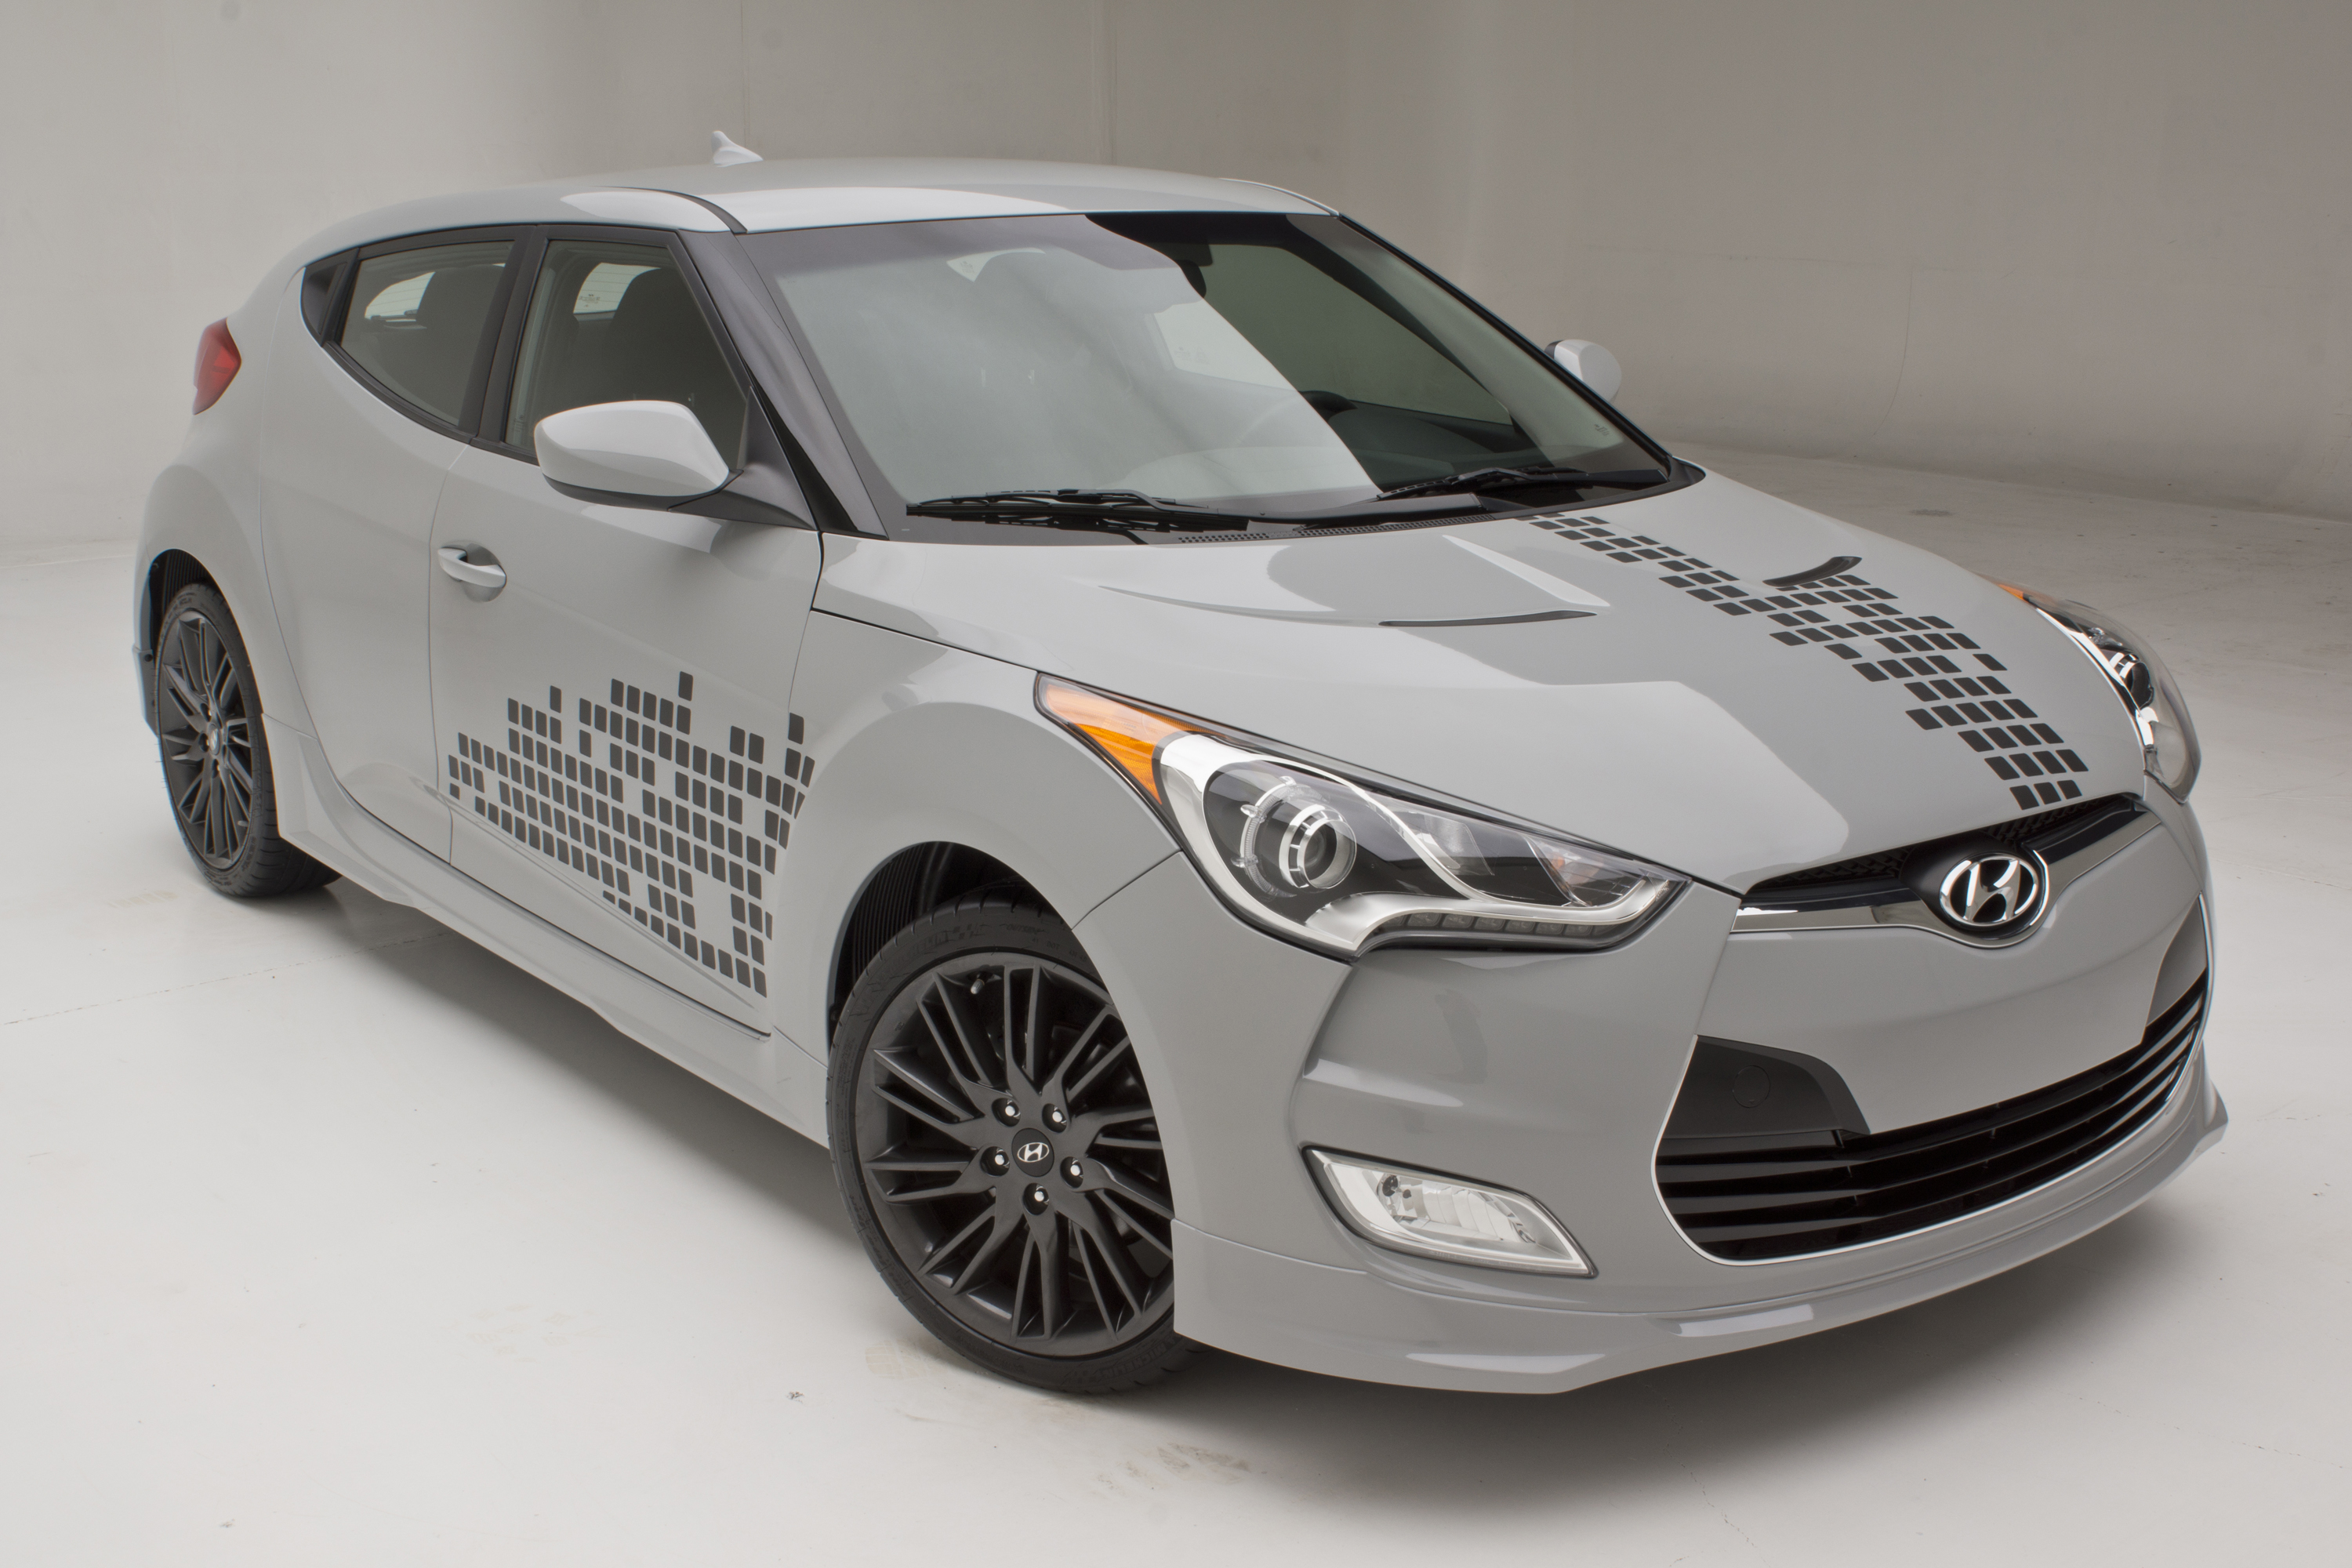 Texas delivers Hyundai's first Special Edition Veloster RE:MIX Model